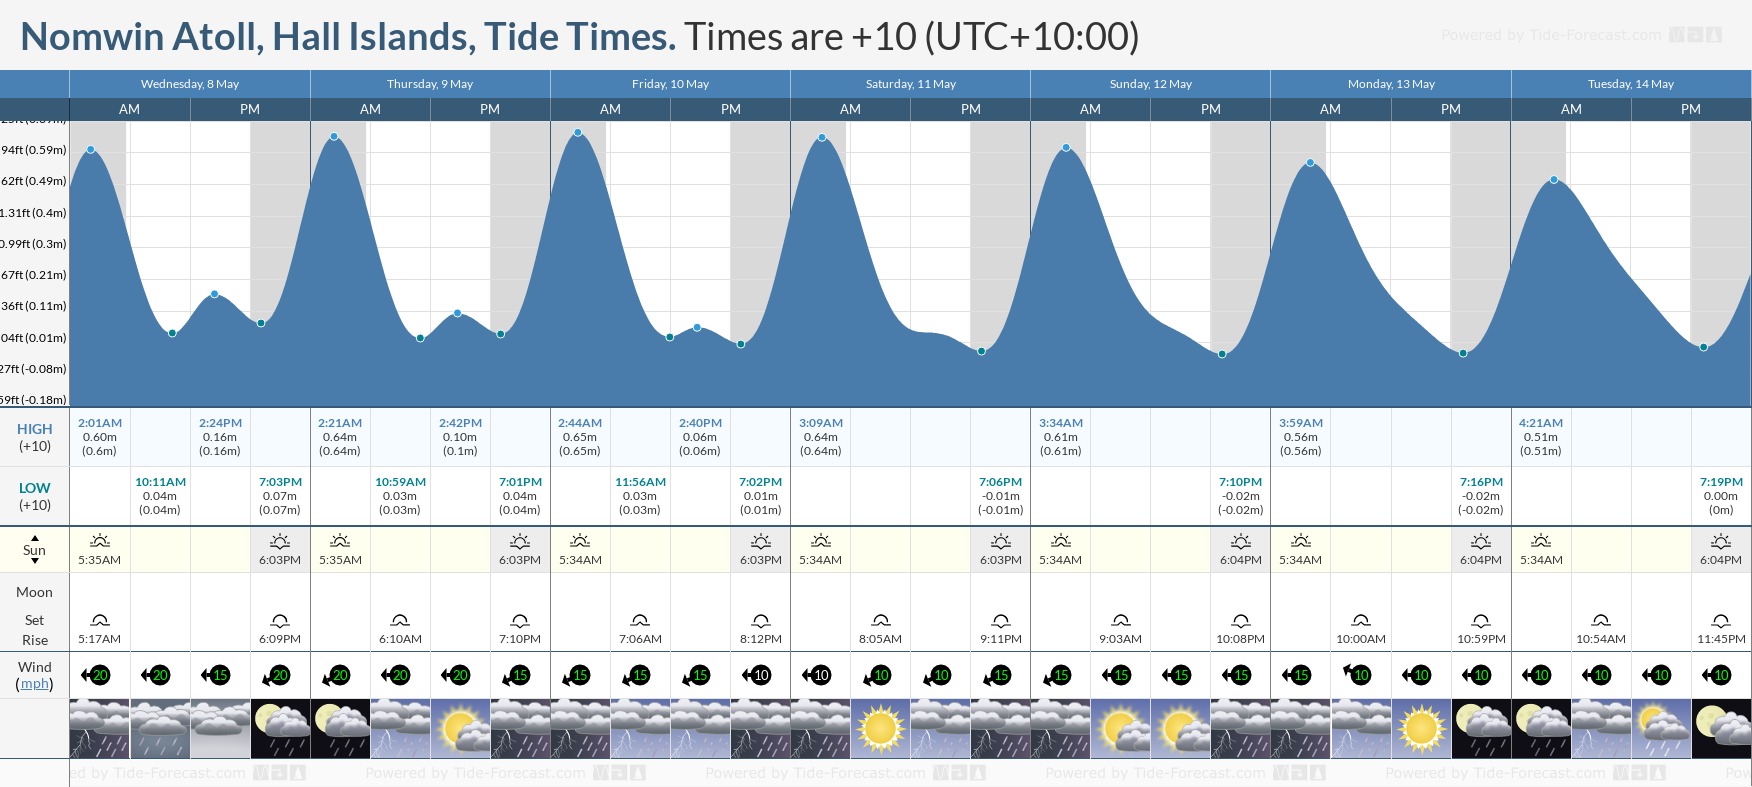 Nomwin Atoll, Hall Islands Tide Chart including high and low tide tide times for the next 7 days